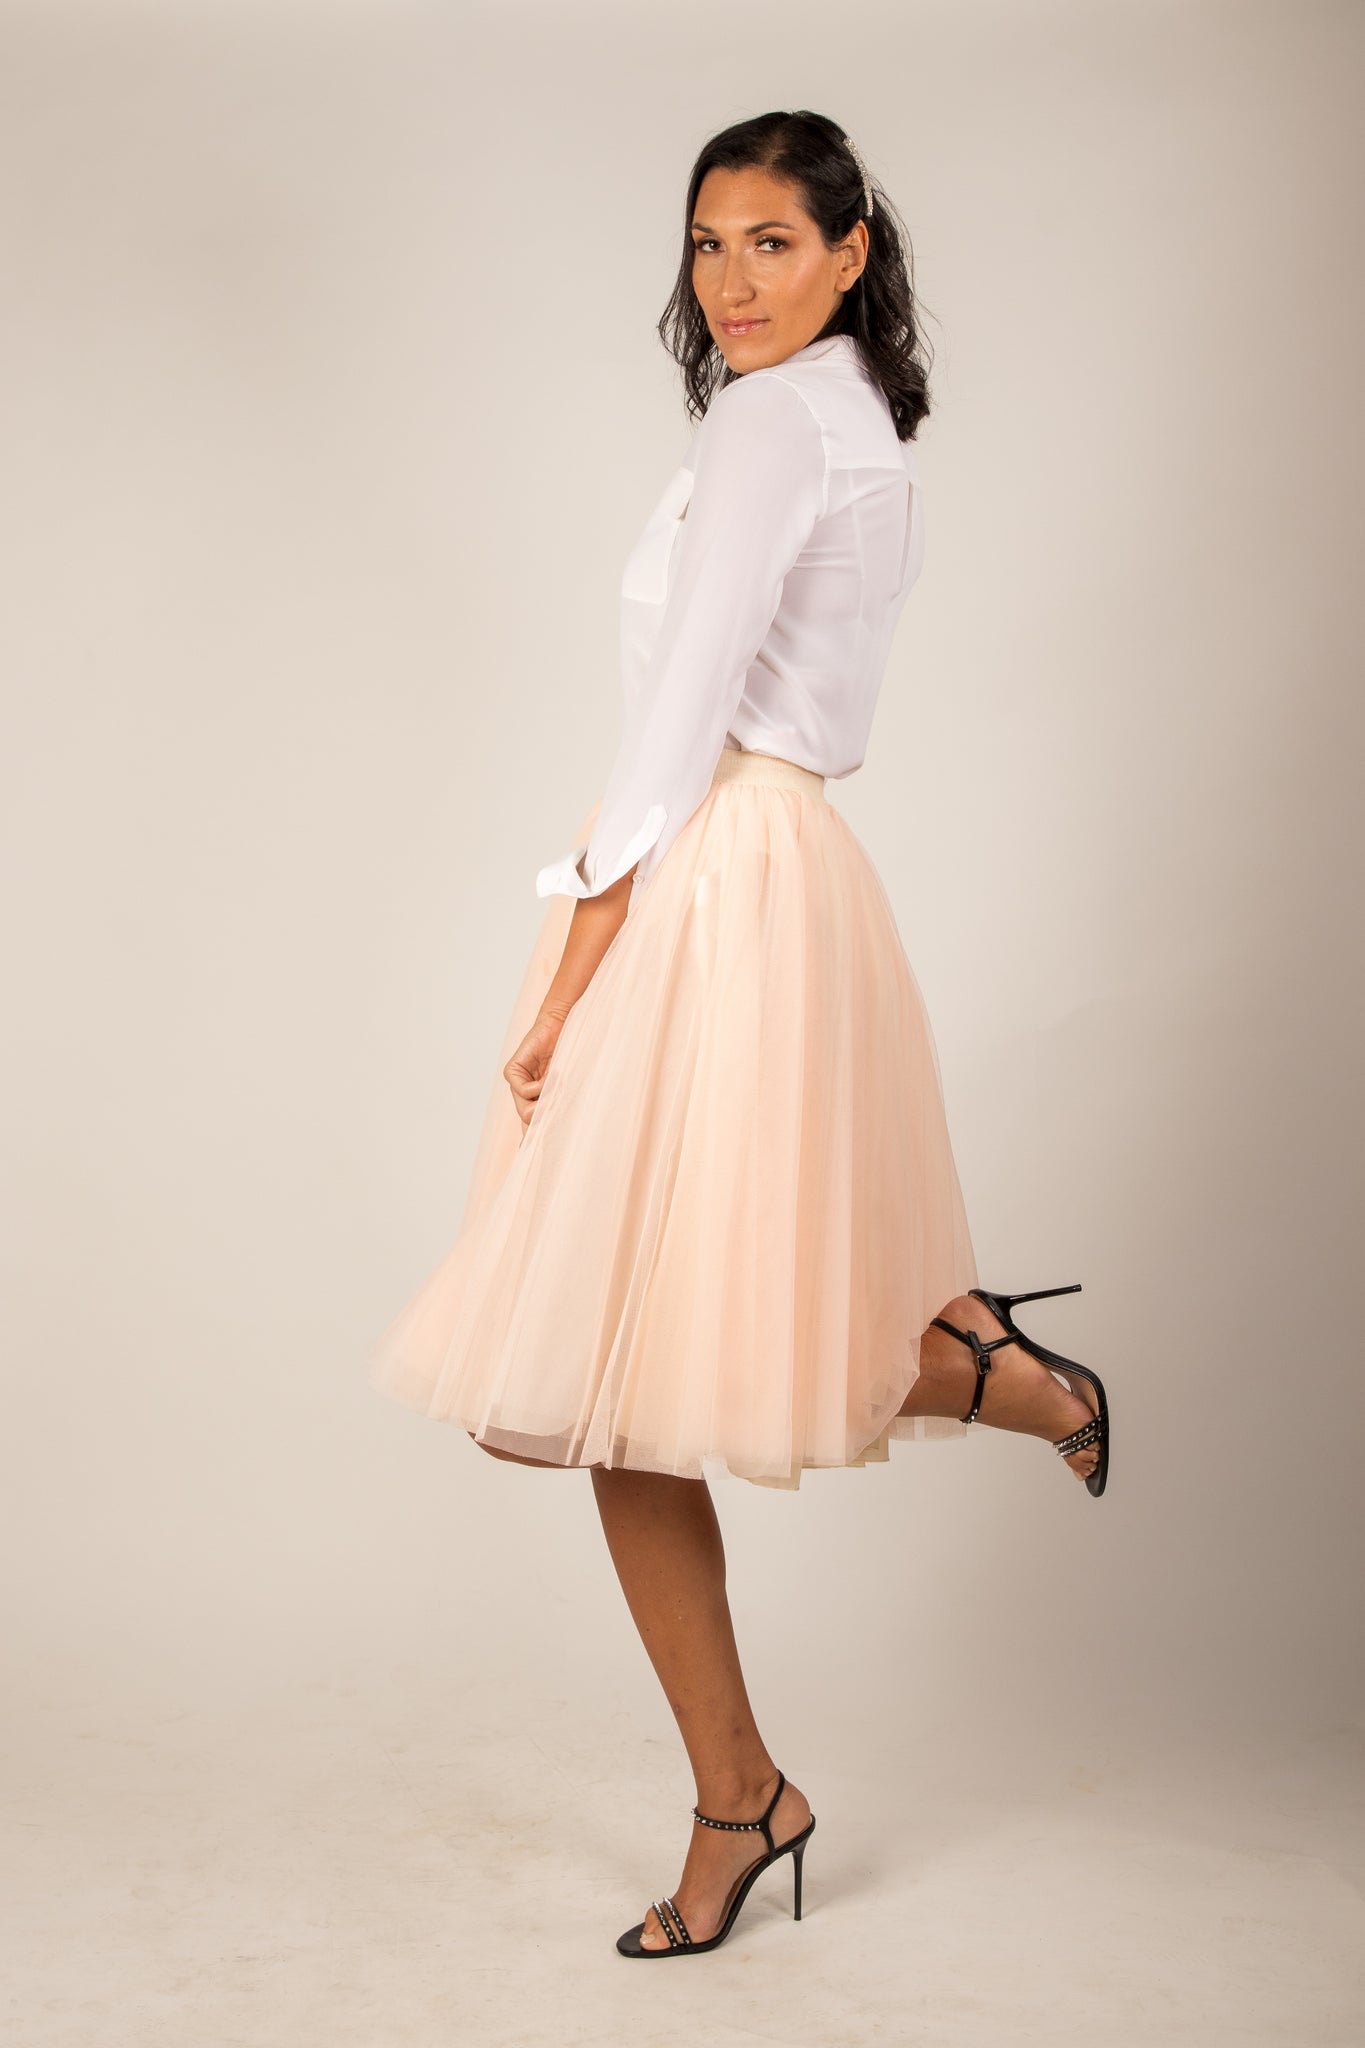 A tall model wearing the Midi Champagne tulle skirt